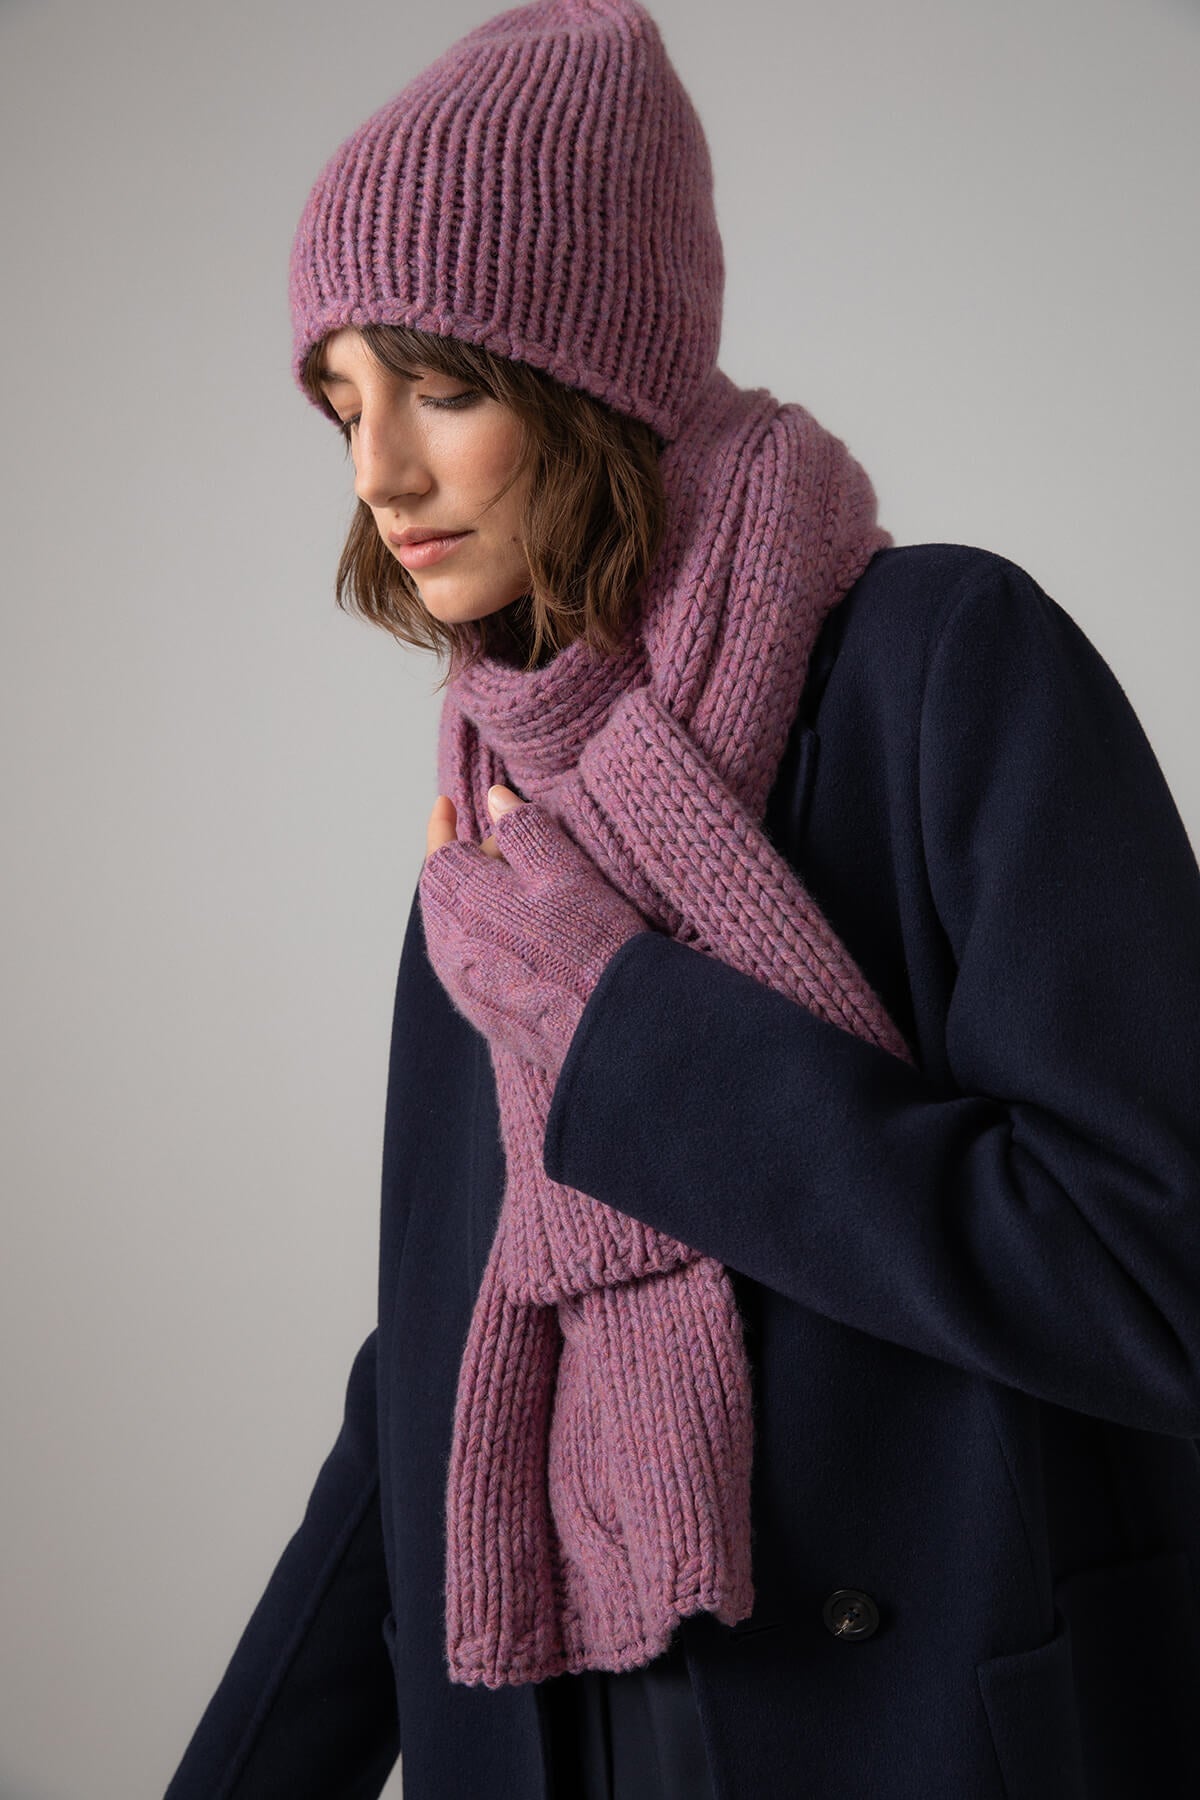 Johnstons of Elgin’s Heather pink Chunky Jersey Cashmere Hat on model wearing matching cashmere scarf and wrist warmers with navy coat HAB03196HE4307